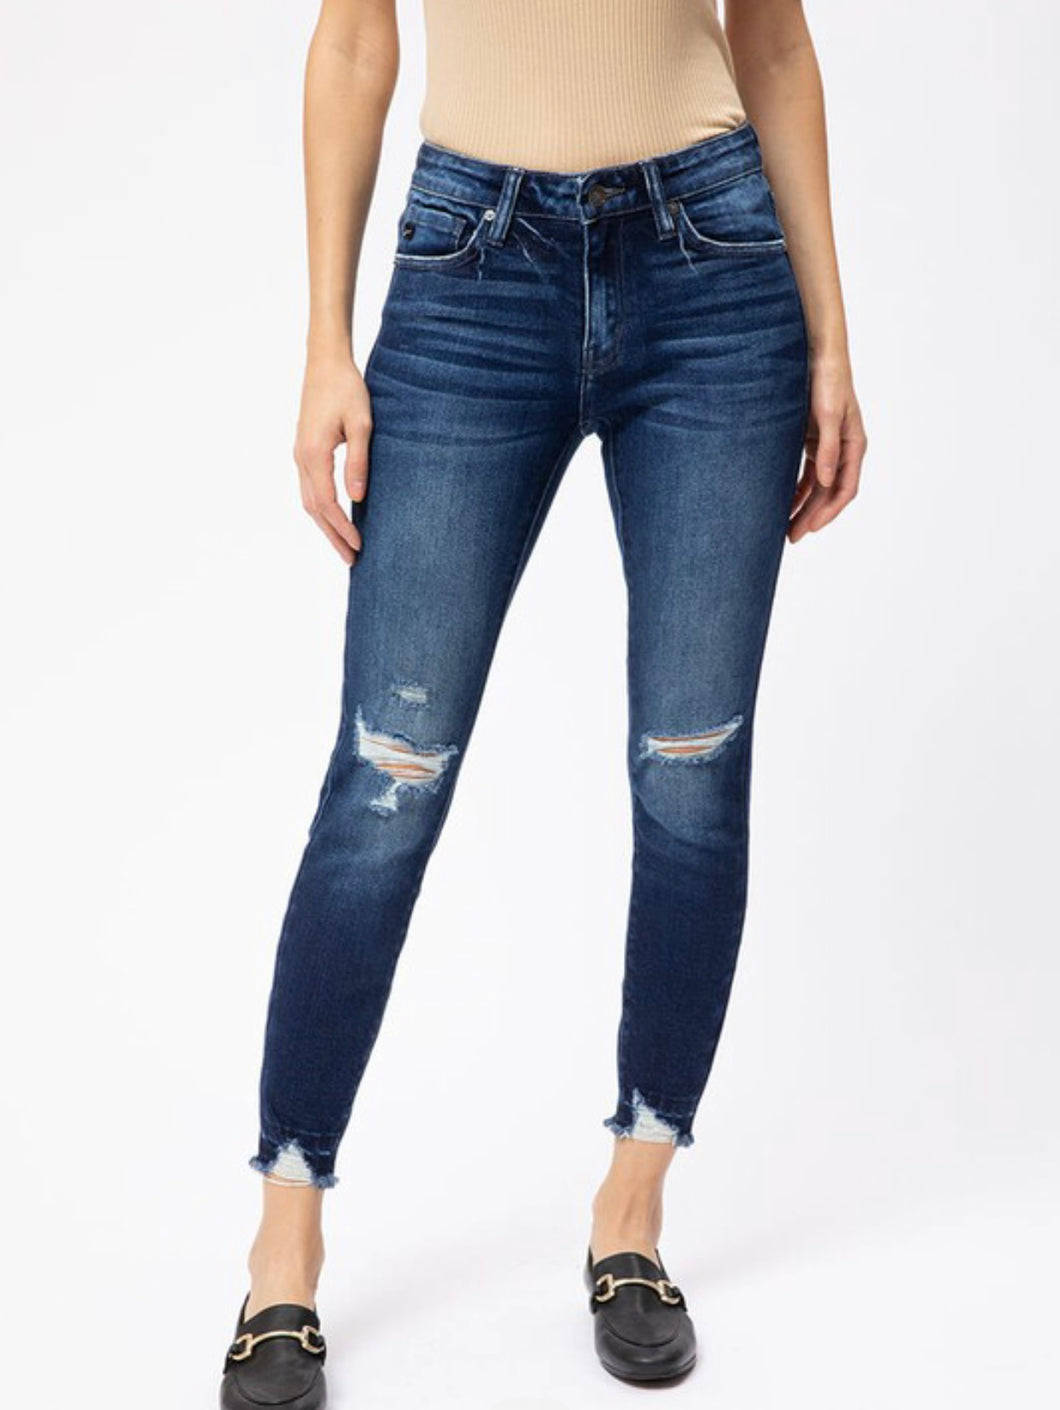 Gemma Kan Can Mid Rise Ankle Skinny Jeans w/exposed hem